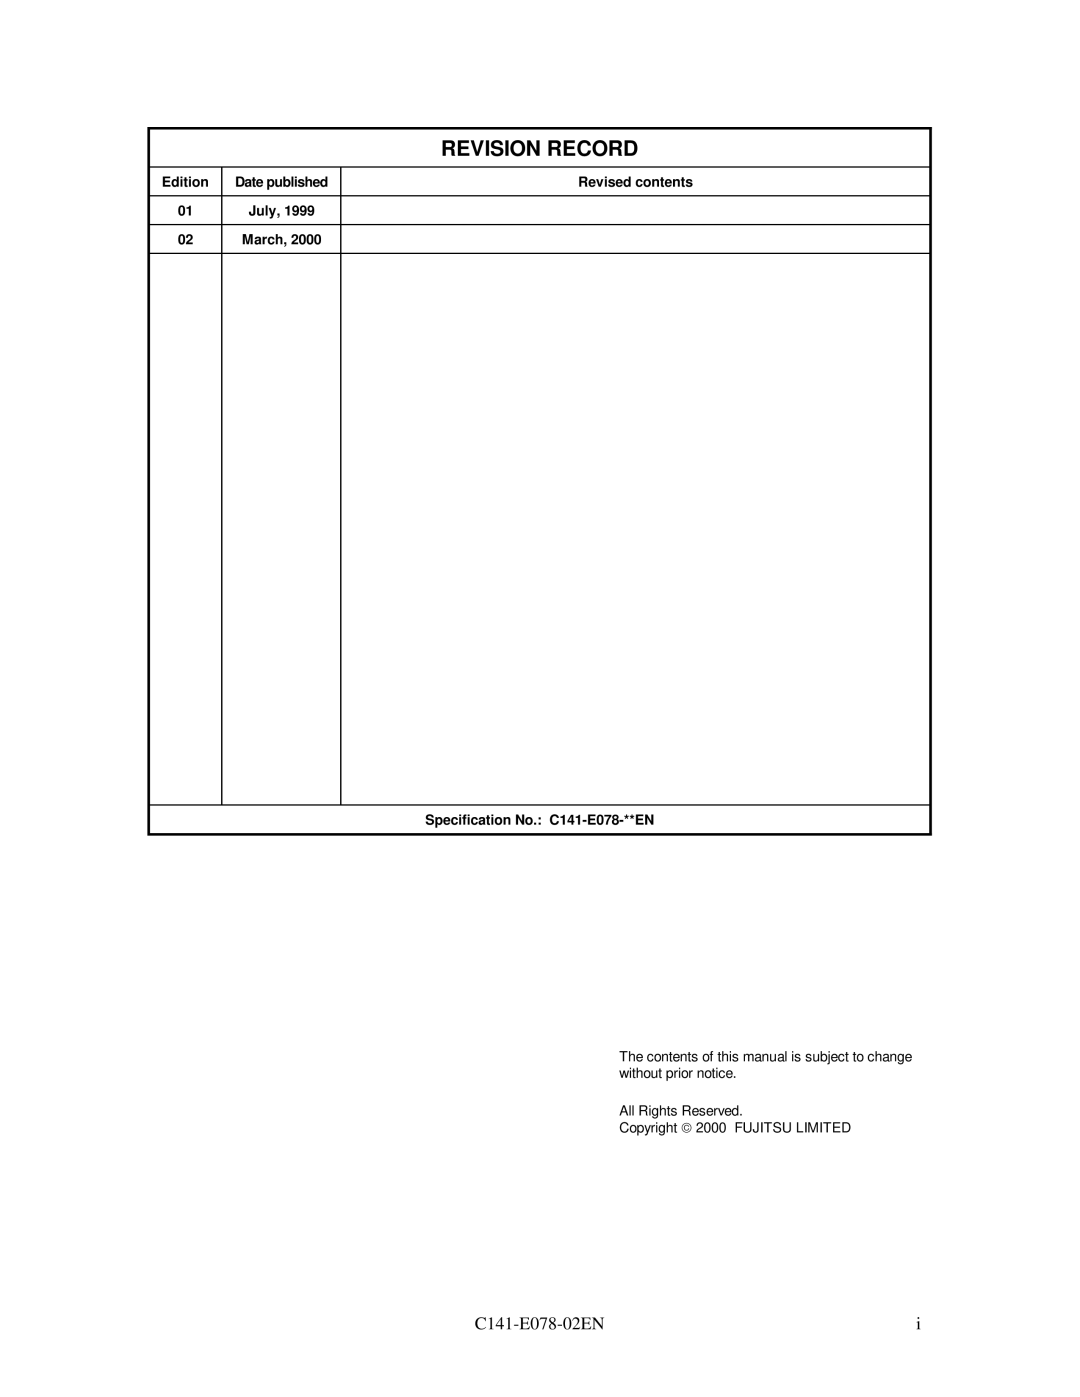 Fujitsu MAG3182FC manual Revision Record, Revised contents, Specification No. C141-E078-**EN, Edition, July, Date published 